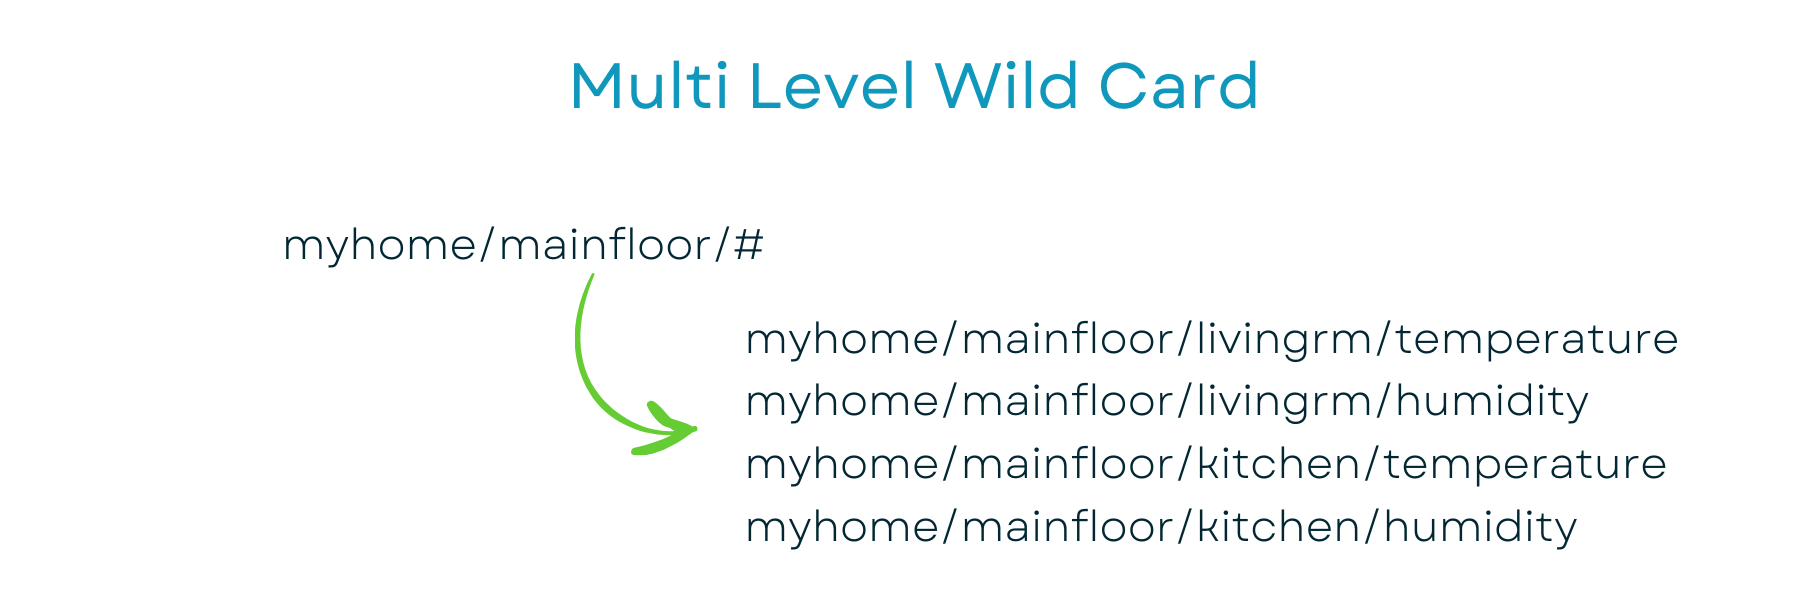 MQTT Install As Home Assistant Add-On Or Self Hosted!